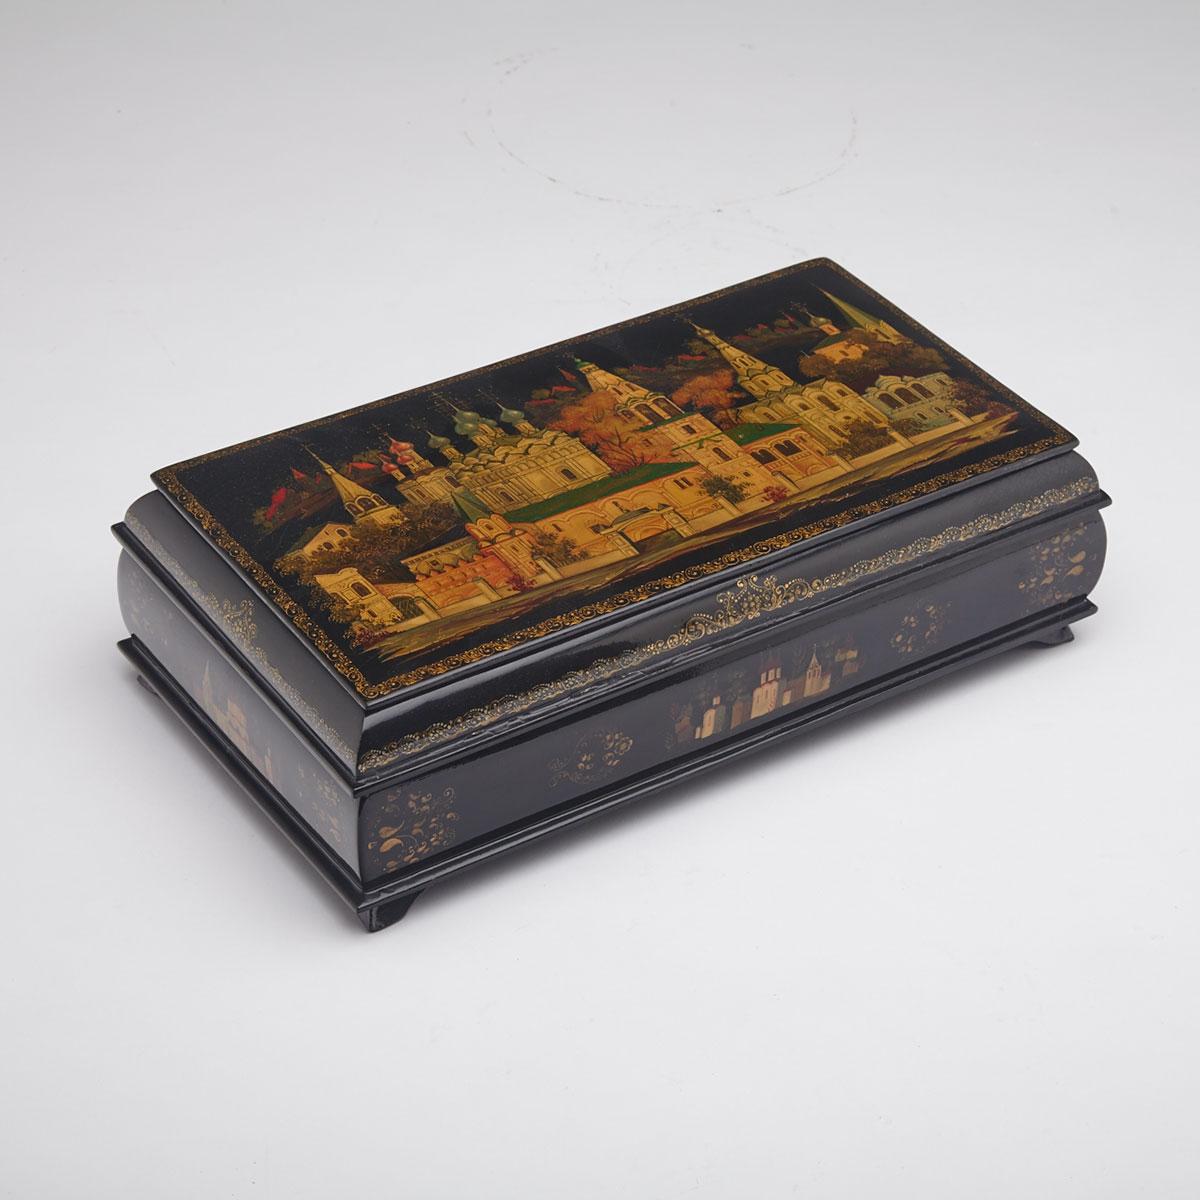 Russian Large Lacquer Double Box, Palekh, 1994